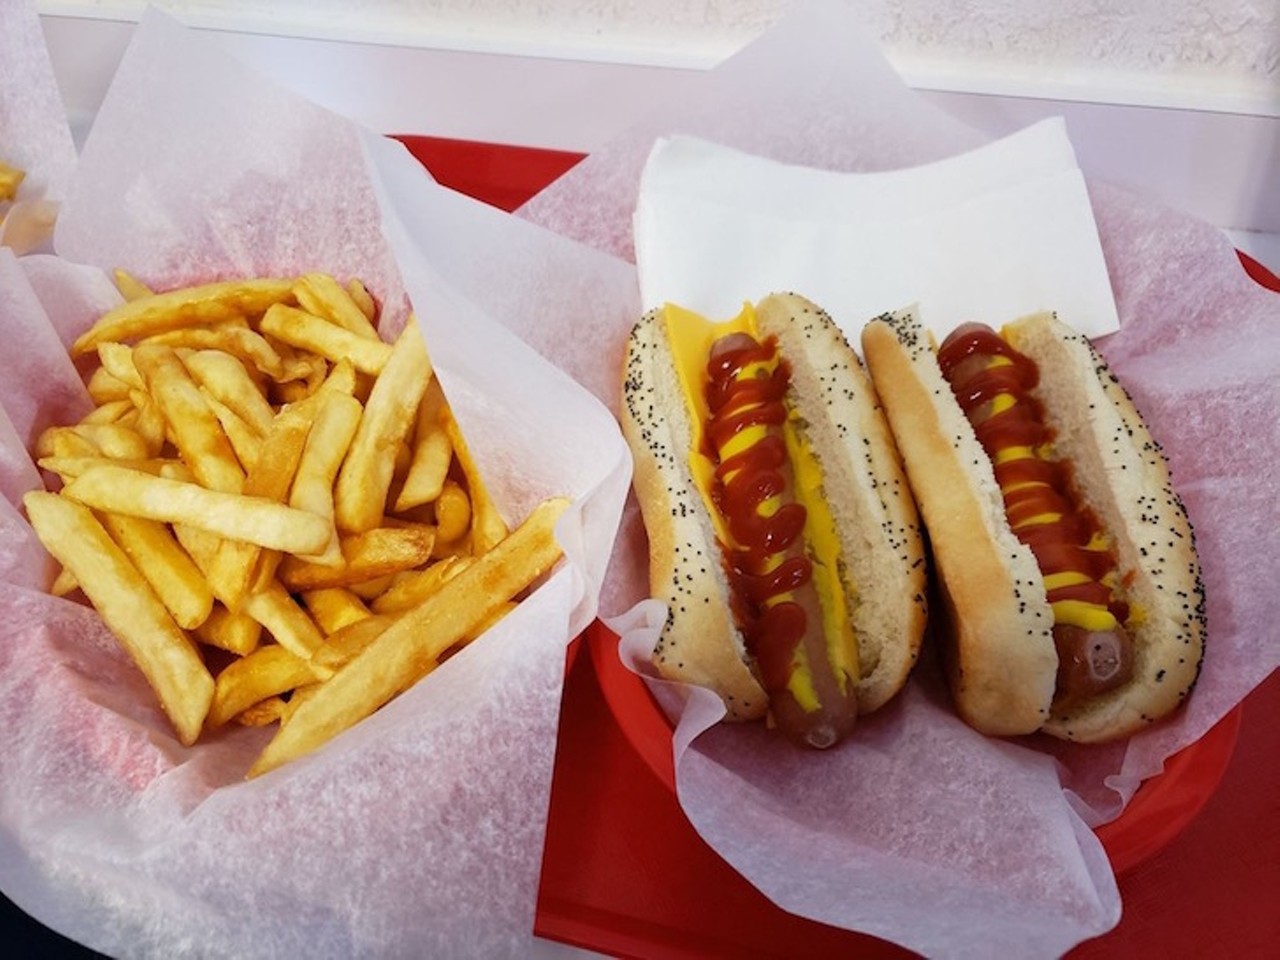 Hot Dog Heaven
5355 E. Colonial Drive
Enjoy your fries with another American classic -- hot dogs.  
Photo via Robbie G./Yelp